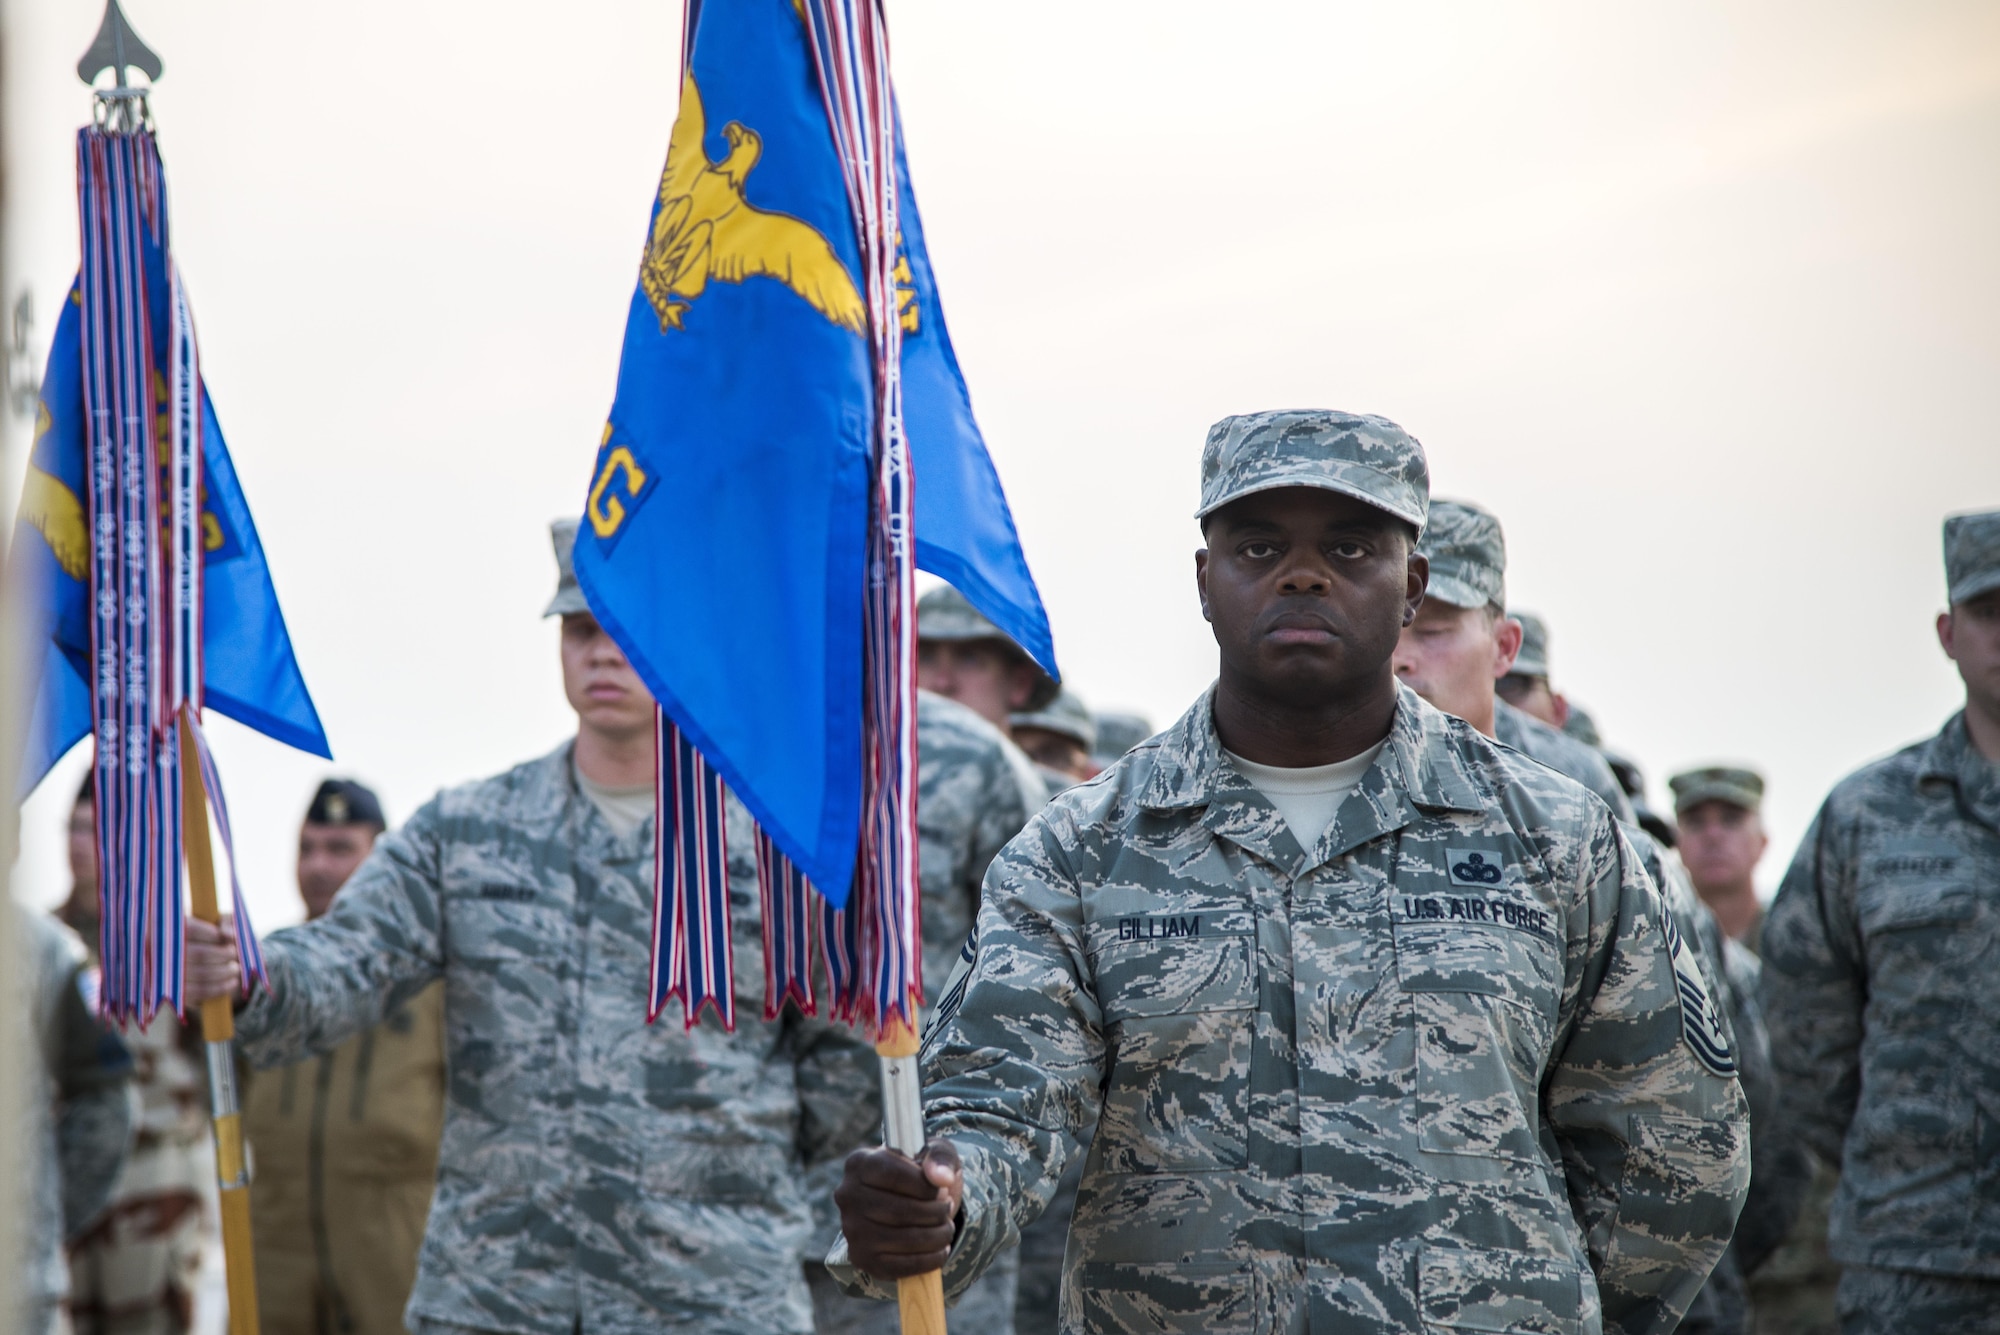 U.S. Air Force Airmen along with coalition forces stand in
formation during a retreat ceremony recognizing the fourteenth anniversary of Sept. 11, 2001, at Al Udeid Air Base, Qatar, Sept. 11, 2015. The retreat ceremony signals the end of the official duty day and serves as a ceremony
for paying respect to the flag. In this ceremony, respect was paid to the flag and the memory of those lost on Sept. 11, 2001. (U.S. Air Force photo/Tech. Sgt. Rasheen Douglas)
